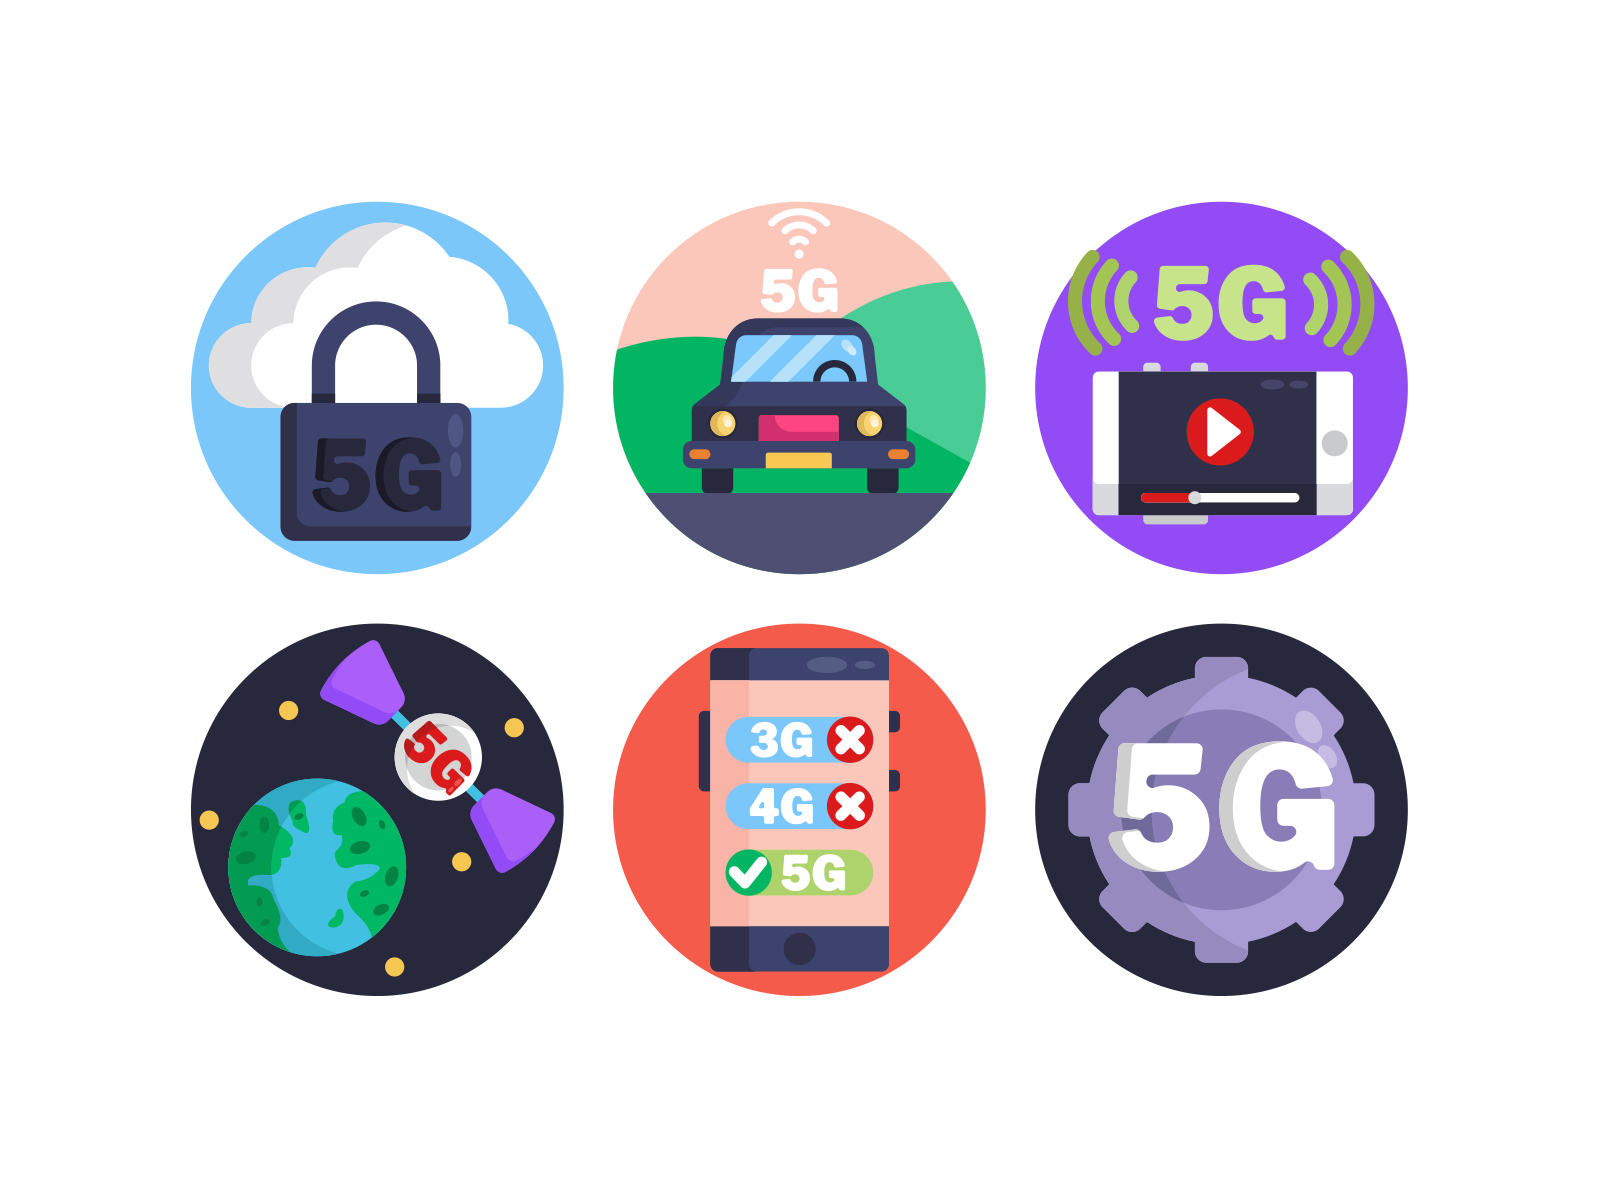 5G Icons 5g settings safe backup cloud storage smart car wifi icons pack icon coloured icons vectors icons vector flat icons internet connection technology 5g connection 5g internet 5g